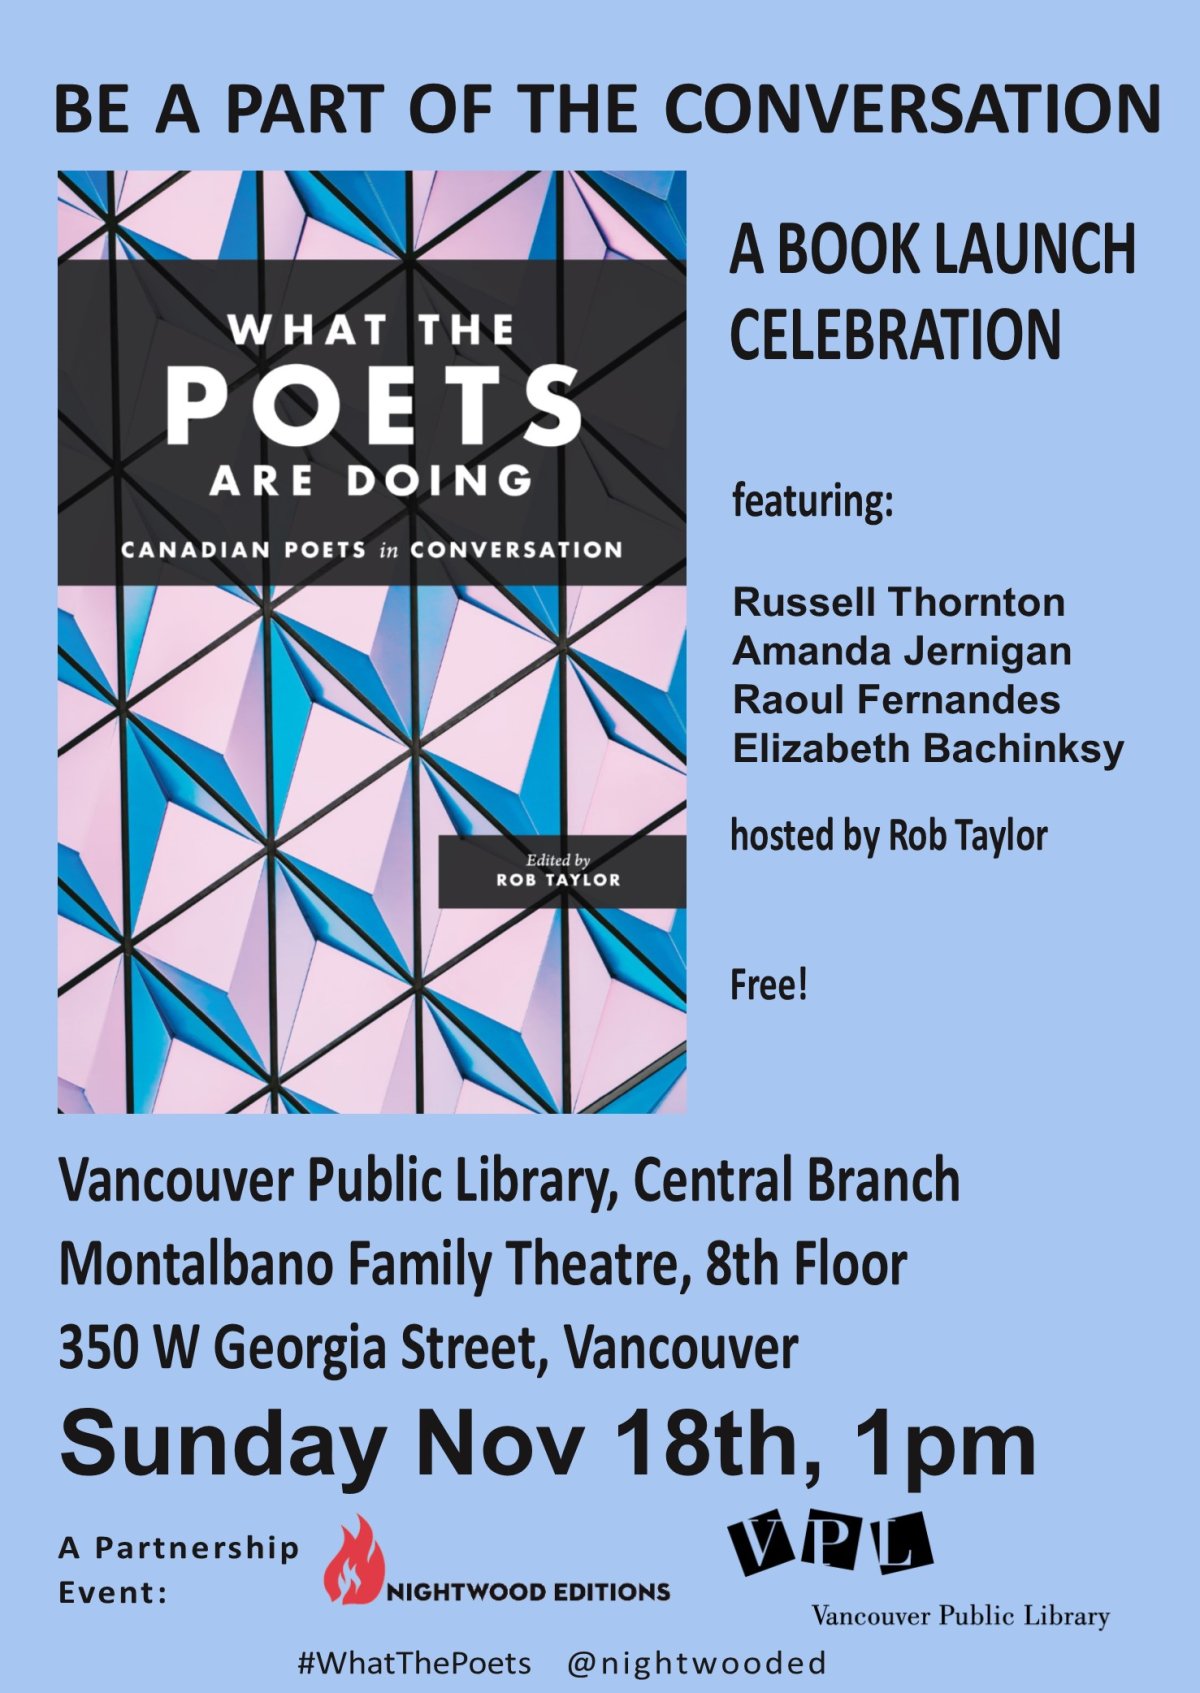 Book Launch “what The Poets Are Doing Canadian Poets In Conversation